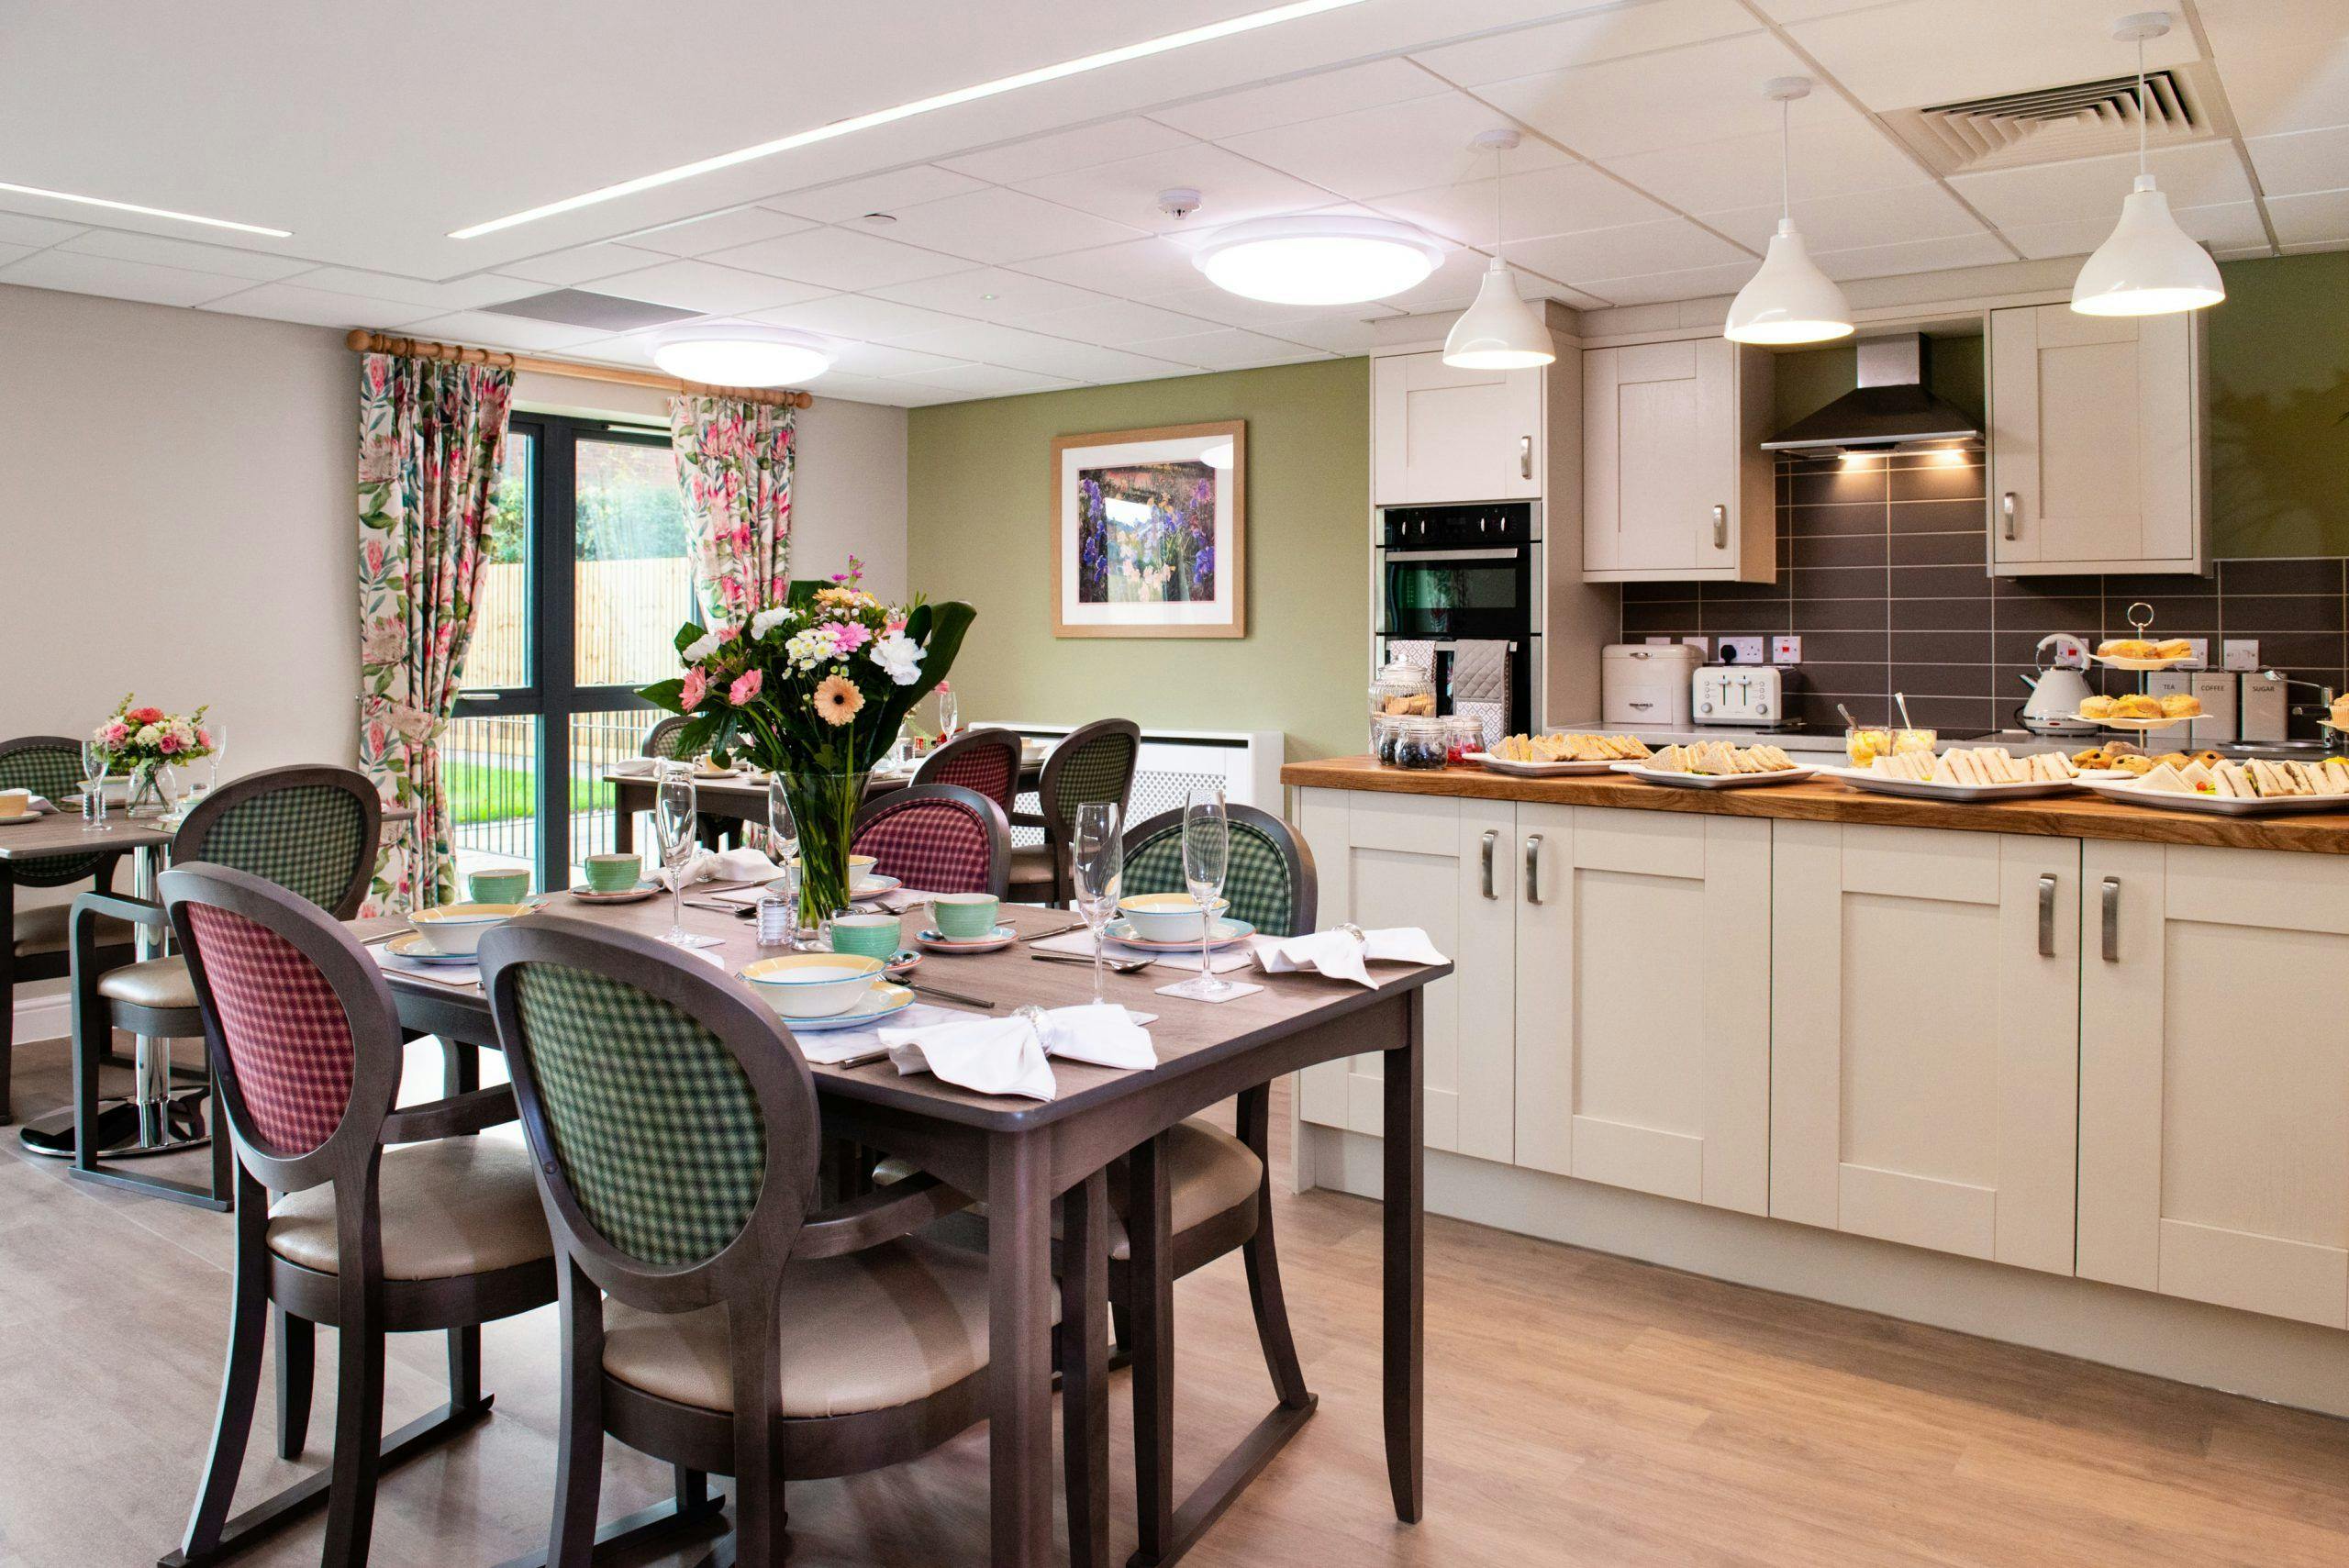 Dining Area of Heanor Park Care Home in Ripley, Derbyshire